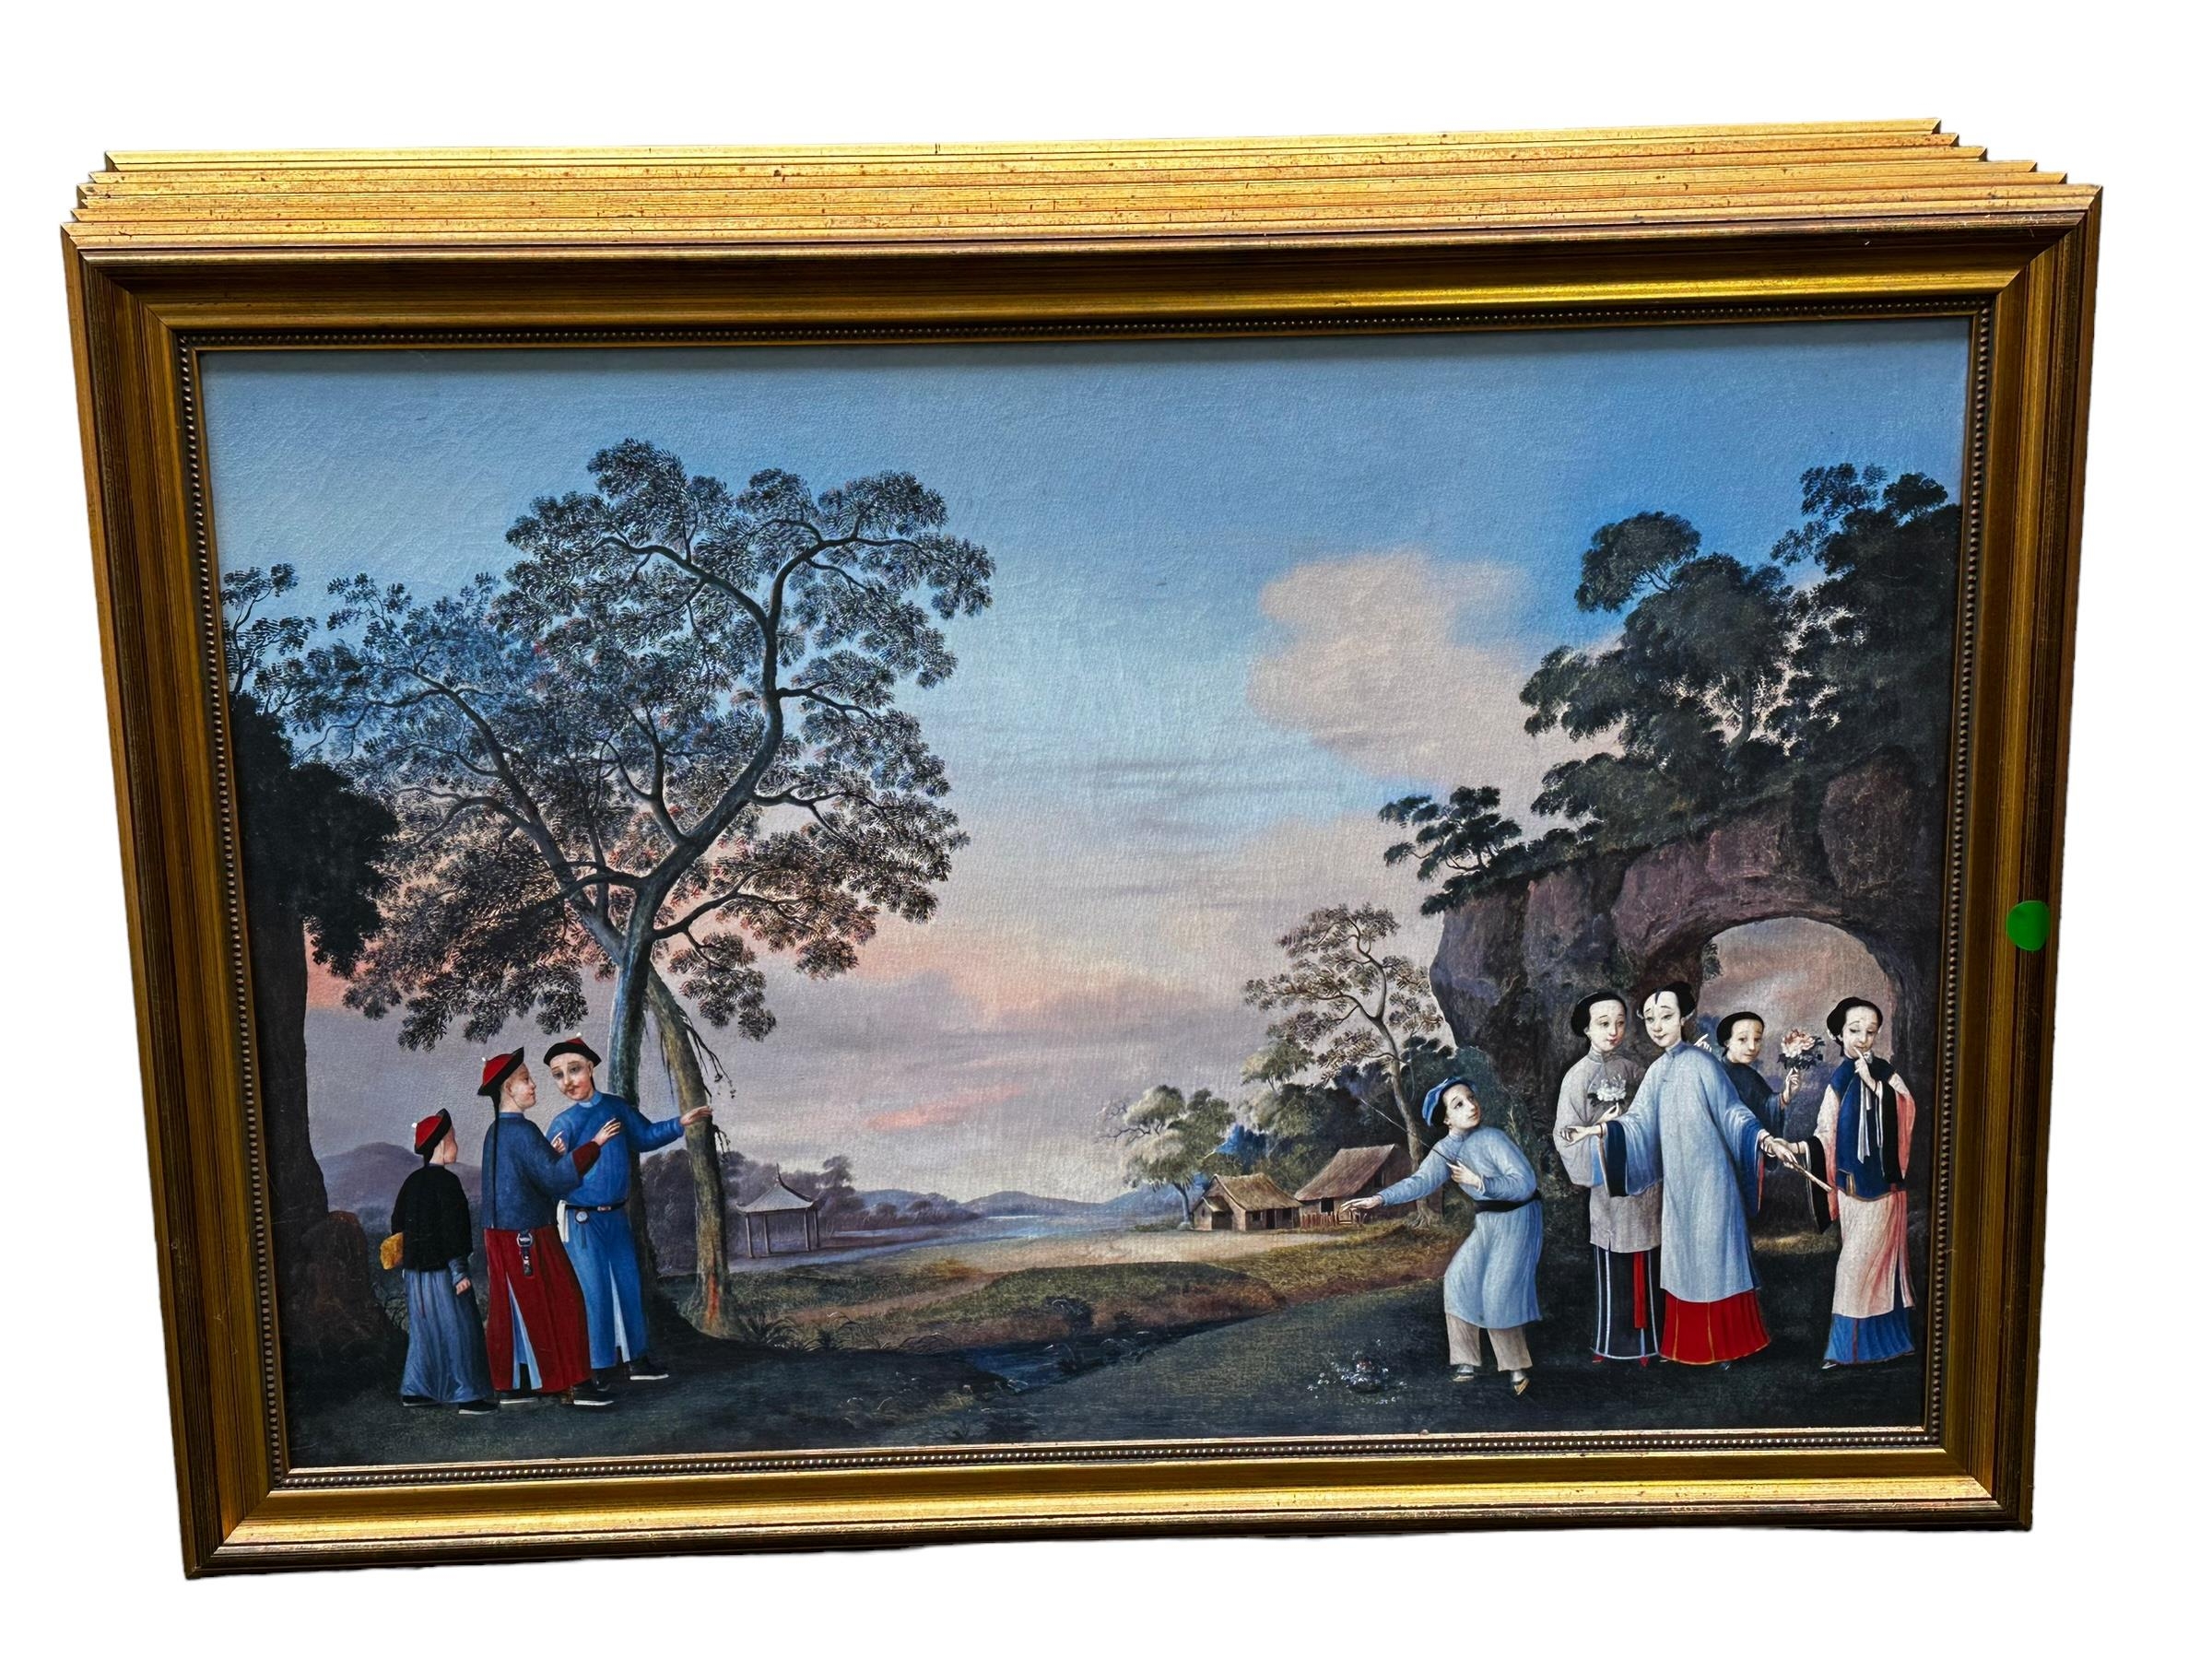 A Set of six C20th gilt framed reproduction copy prints, "Views of Chinese social life", from the - Image 3 of 8